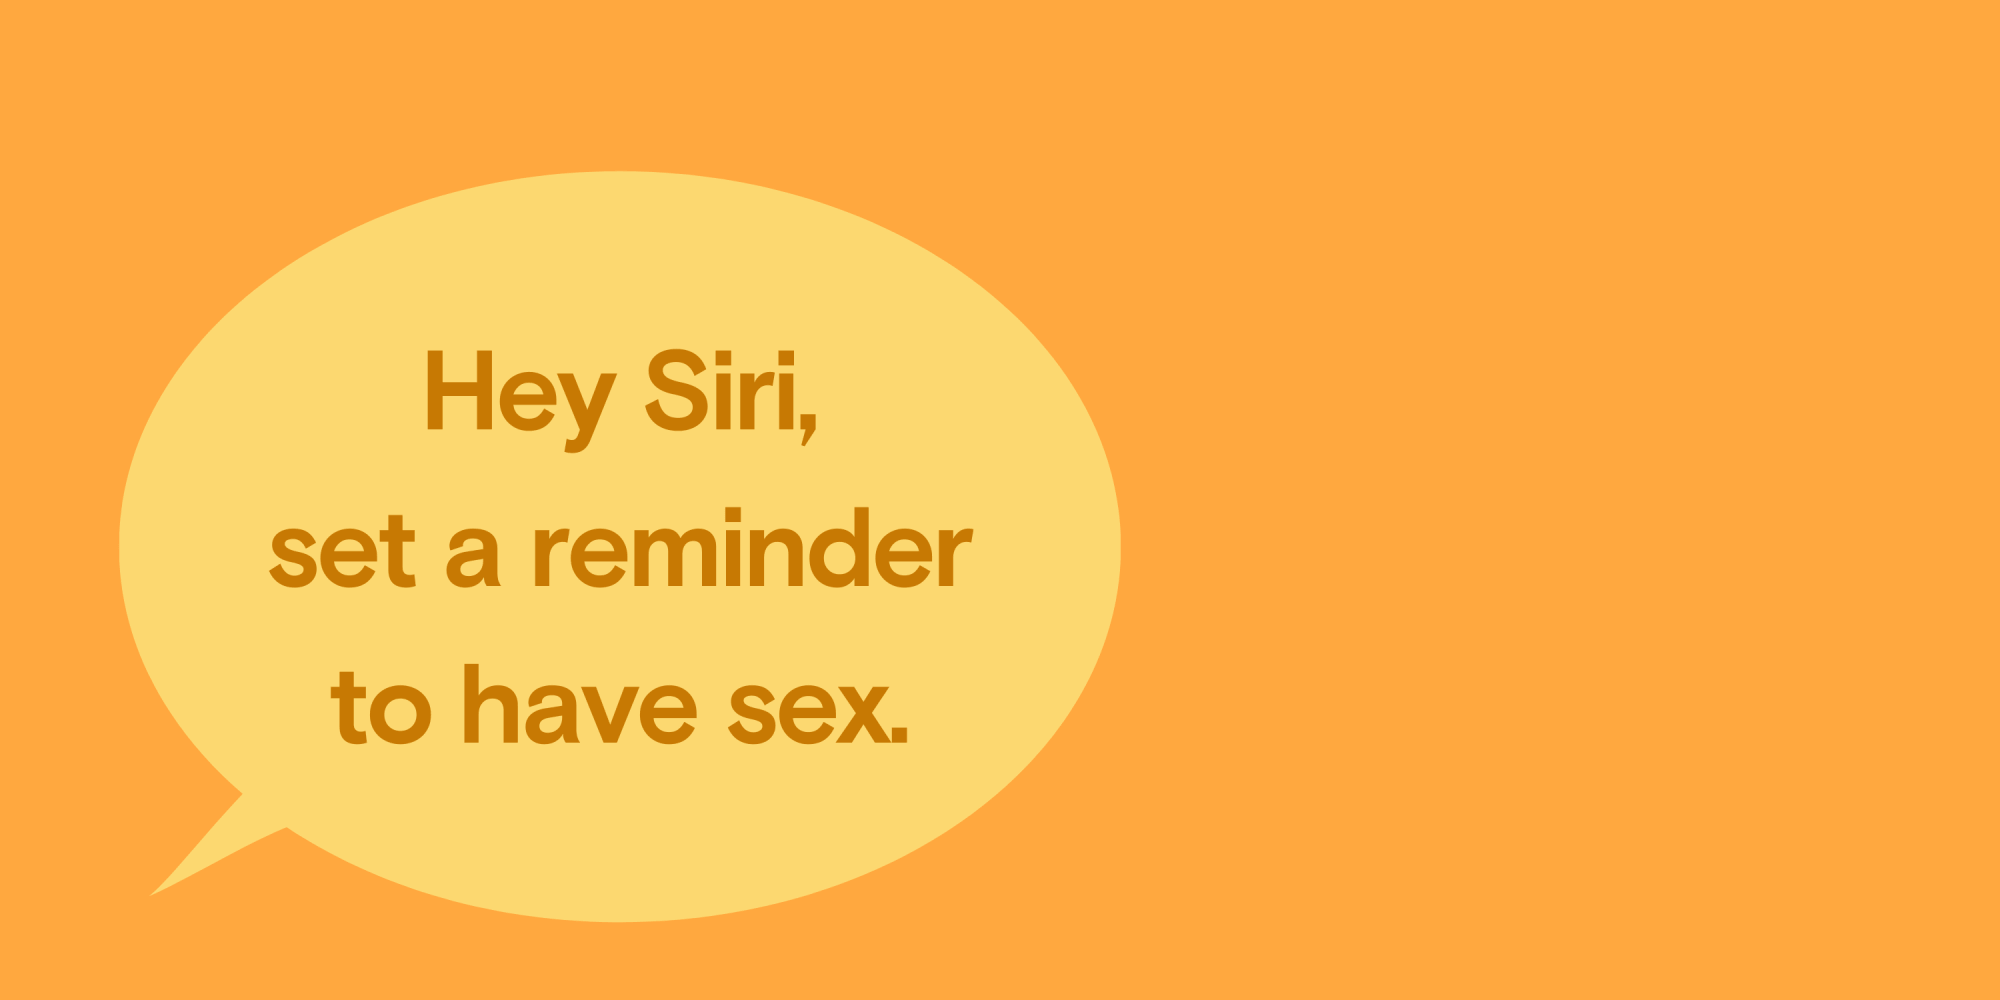 Orange background with a yellow speech bubble that says "Hi Siri, set a reminder to have sex"